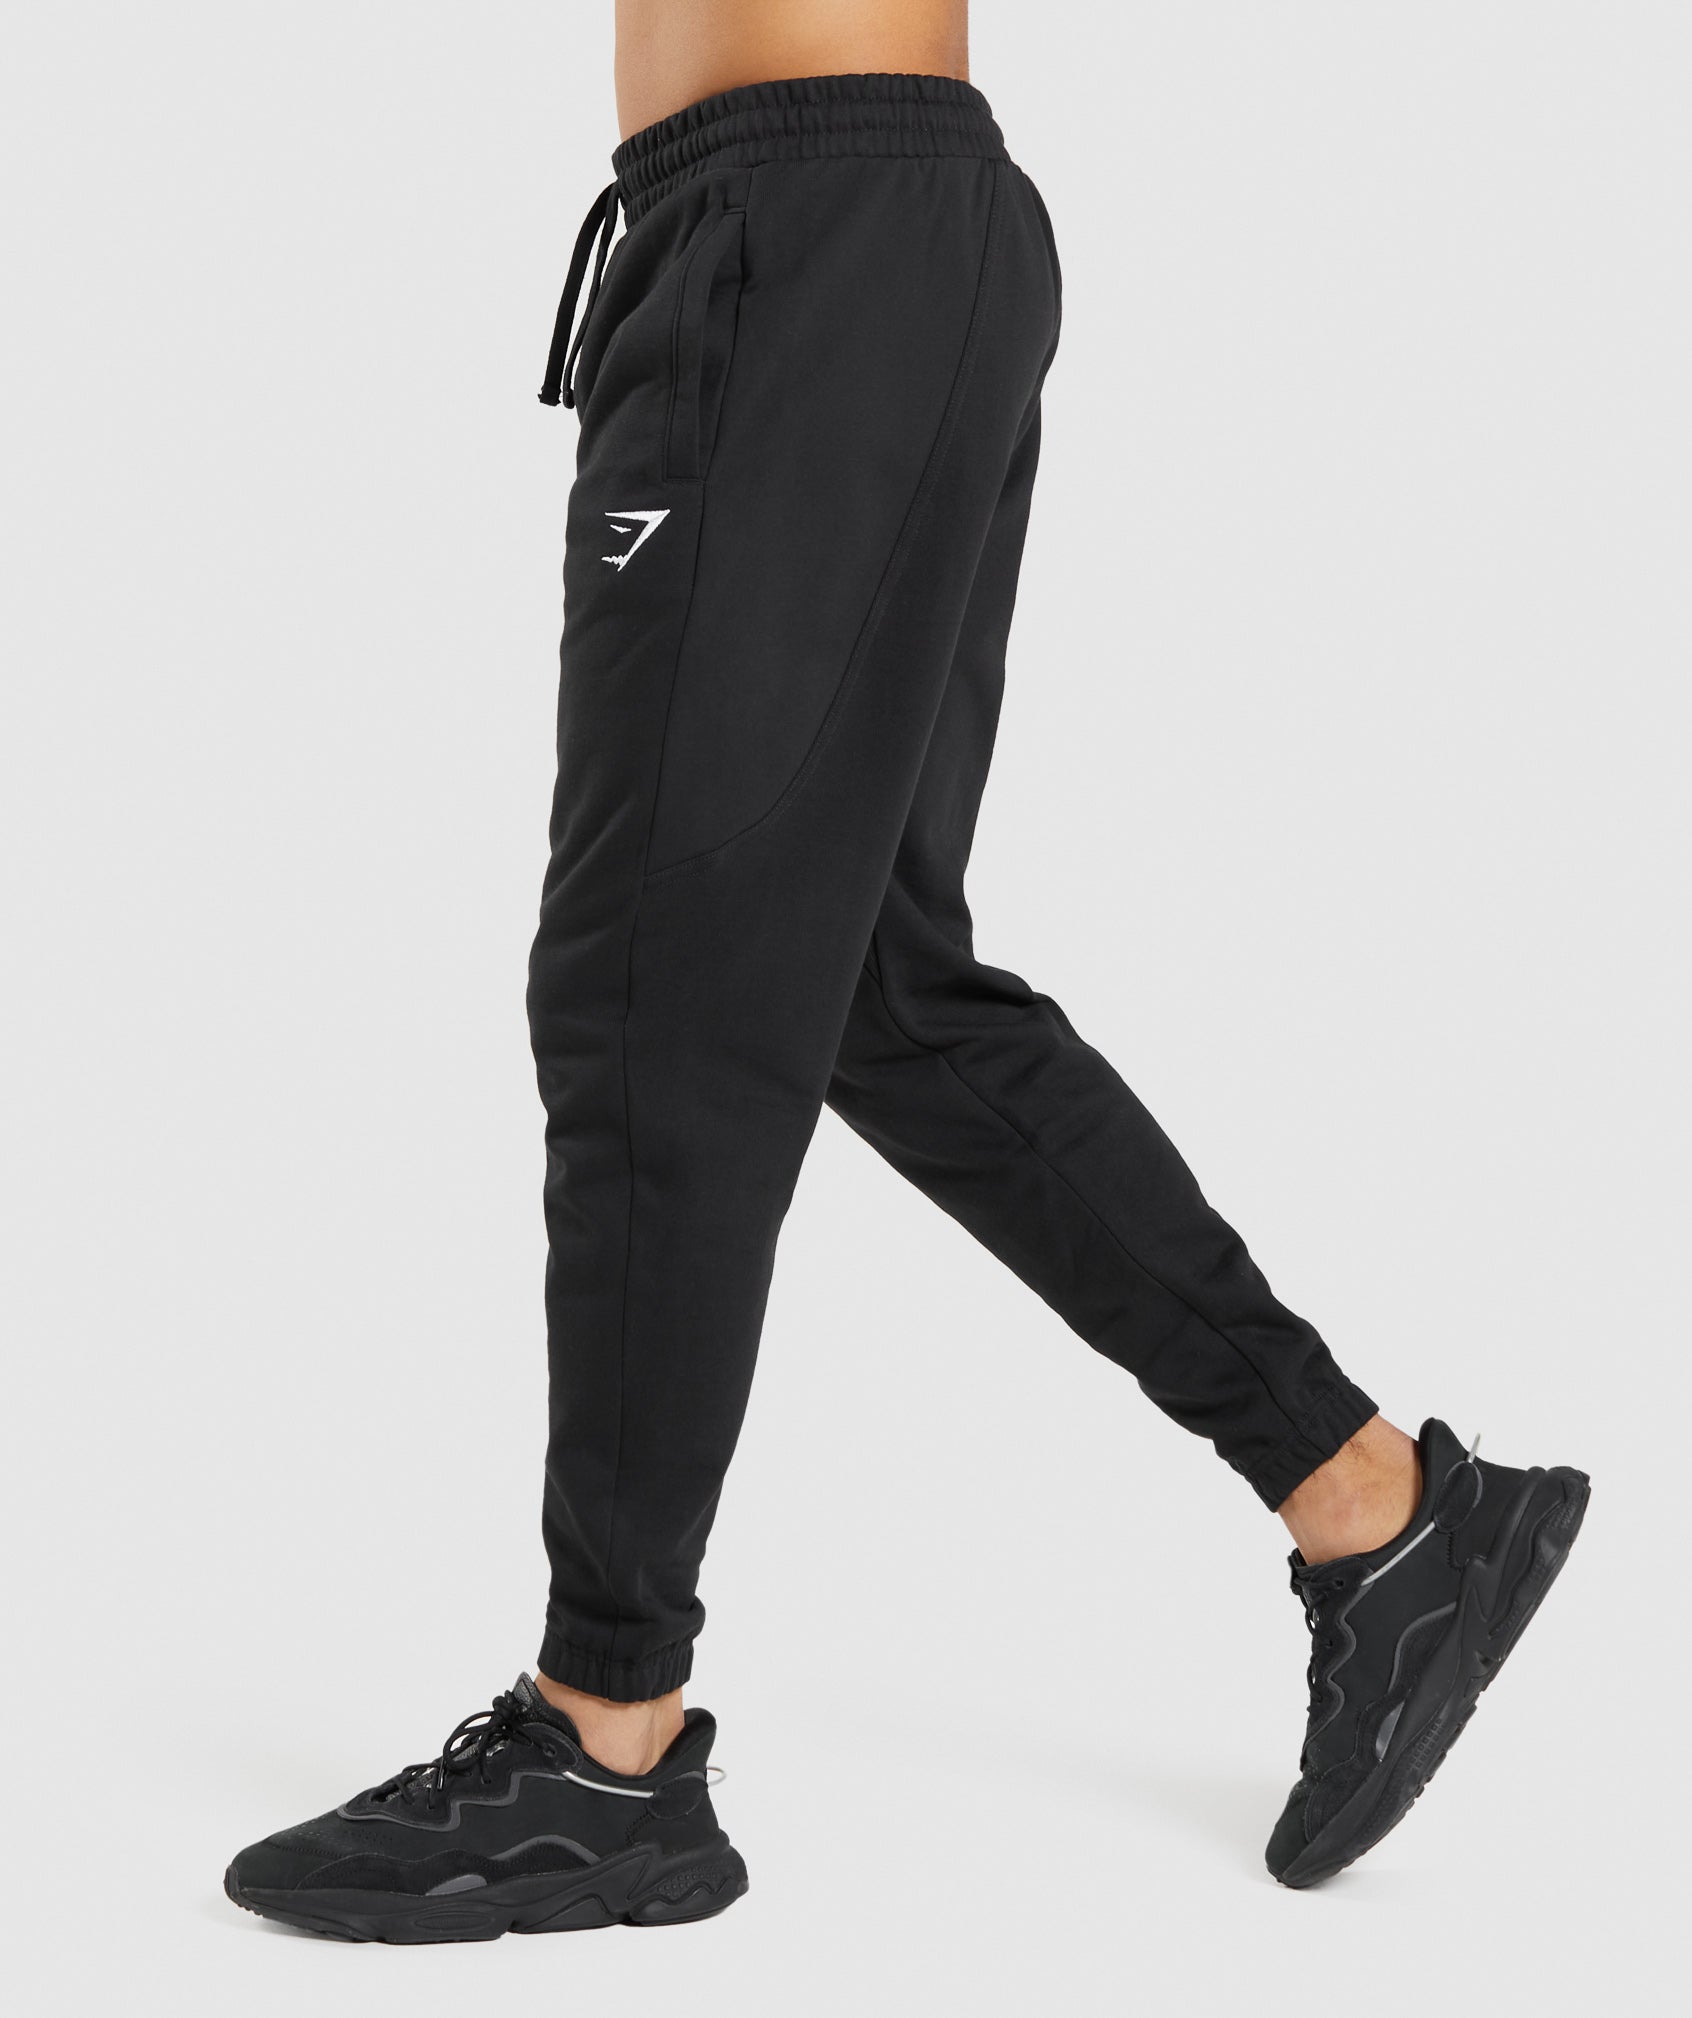 Essential Jogger in Black - view 3